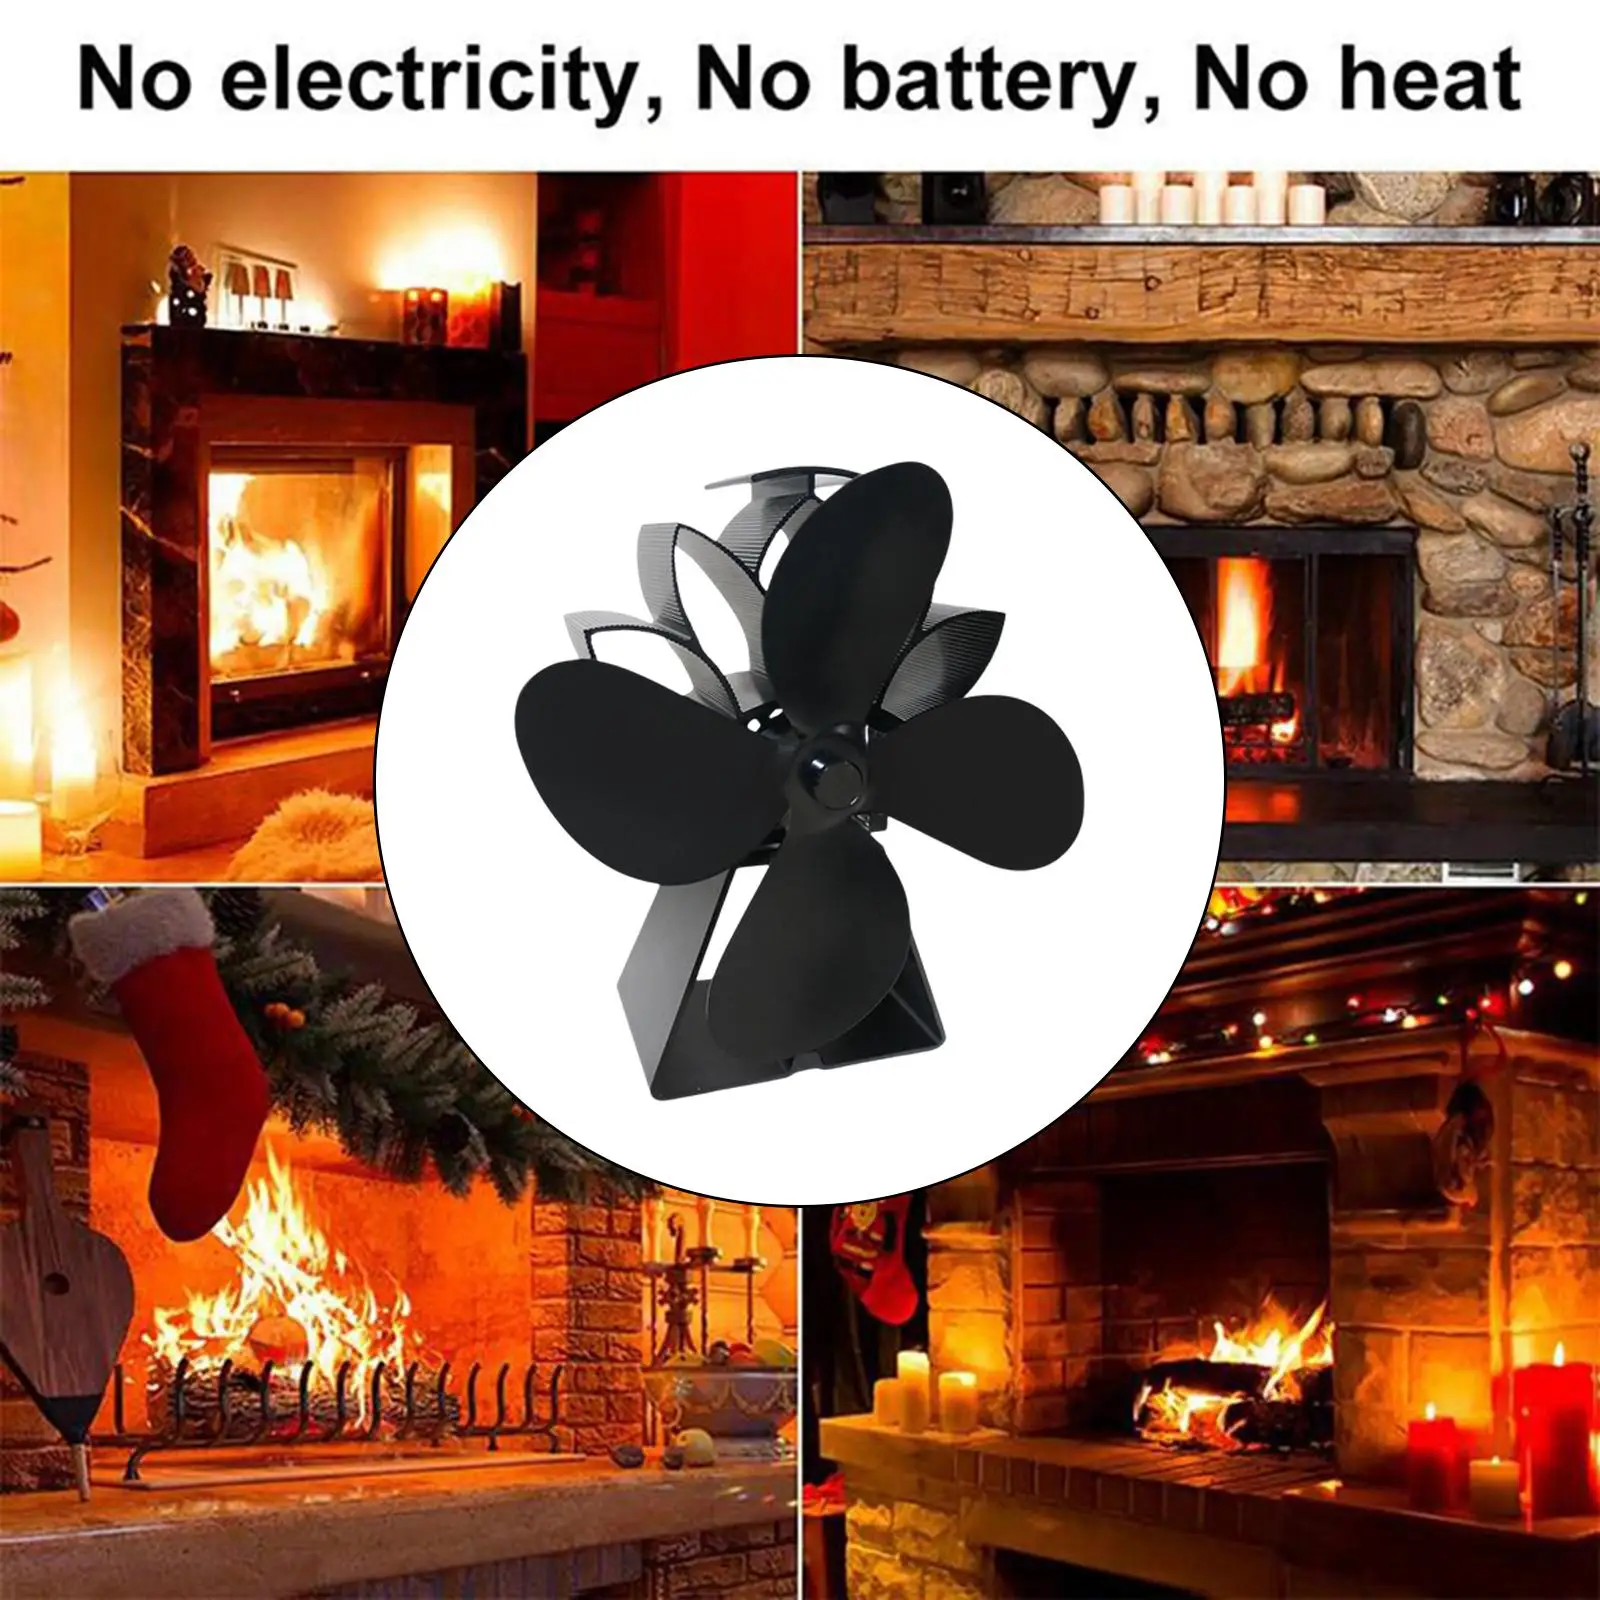 Heat Powered stoves top fan  Burner stoves Silent Motor Efficient Heat Distribution Fan Non Electric Furnace 